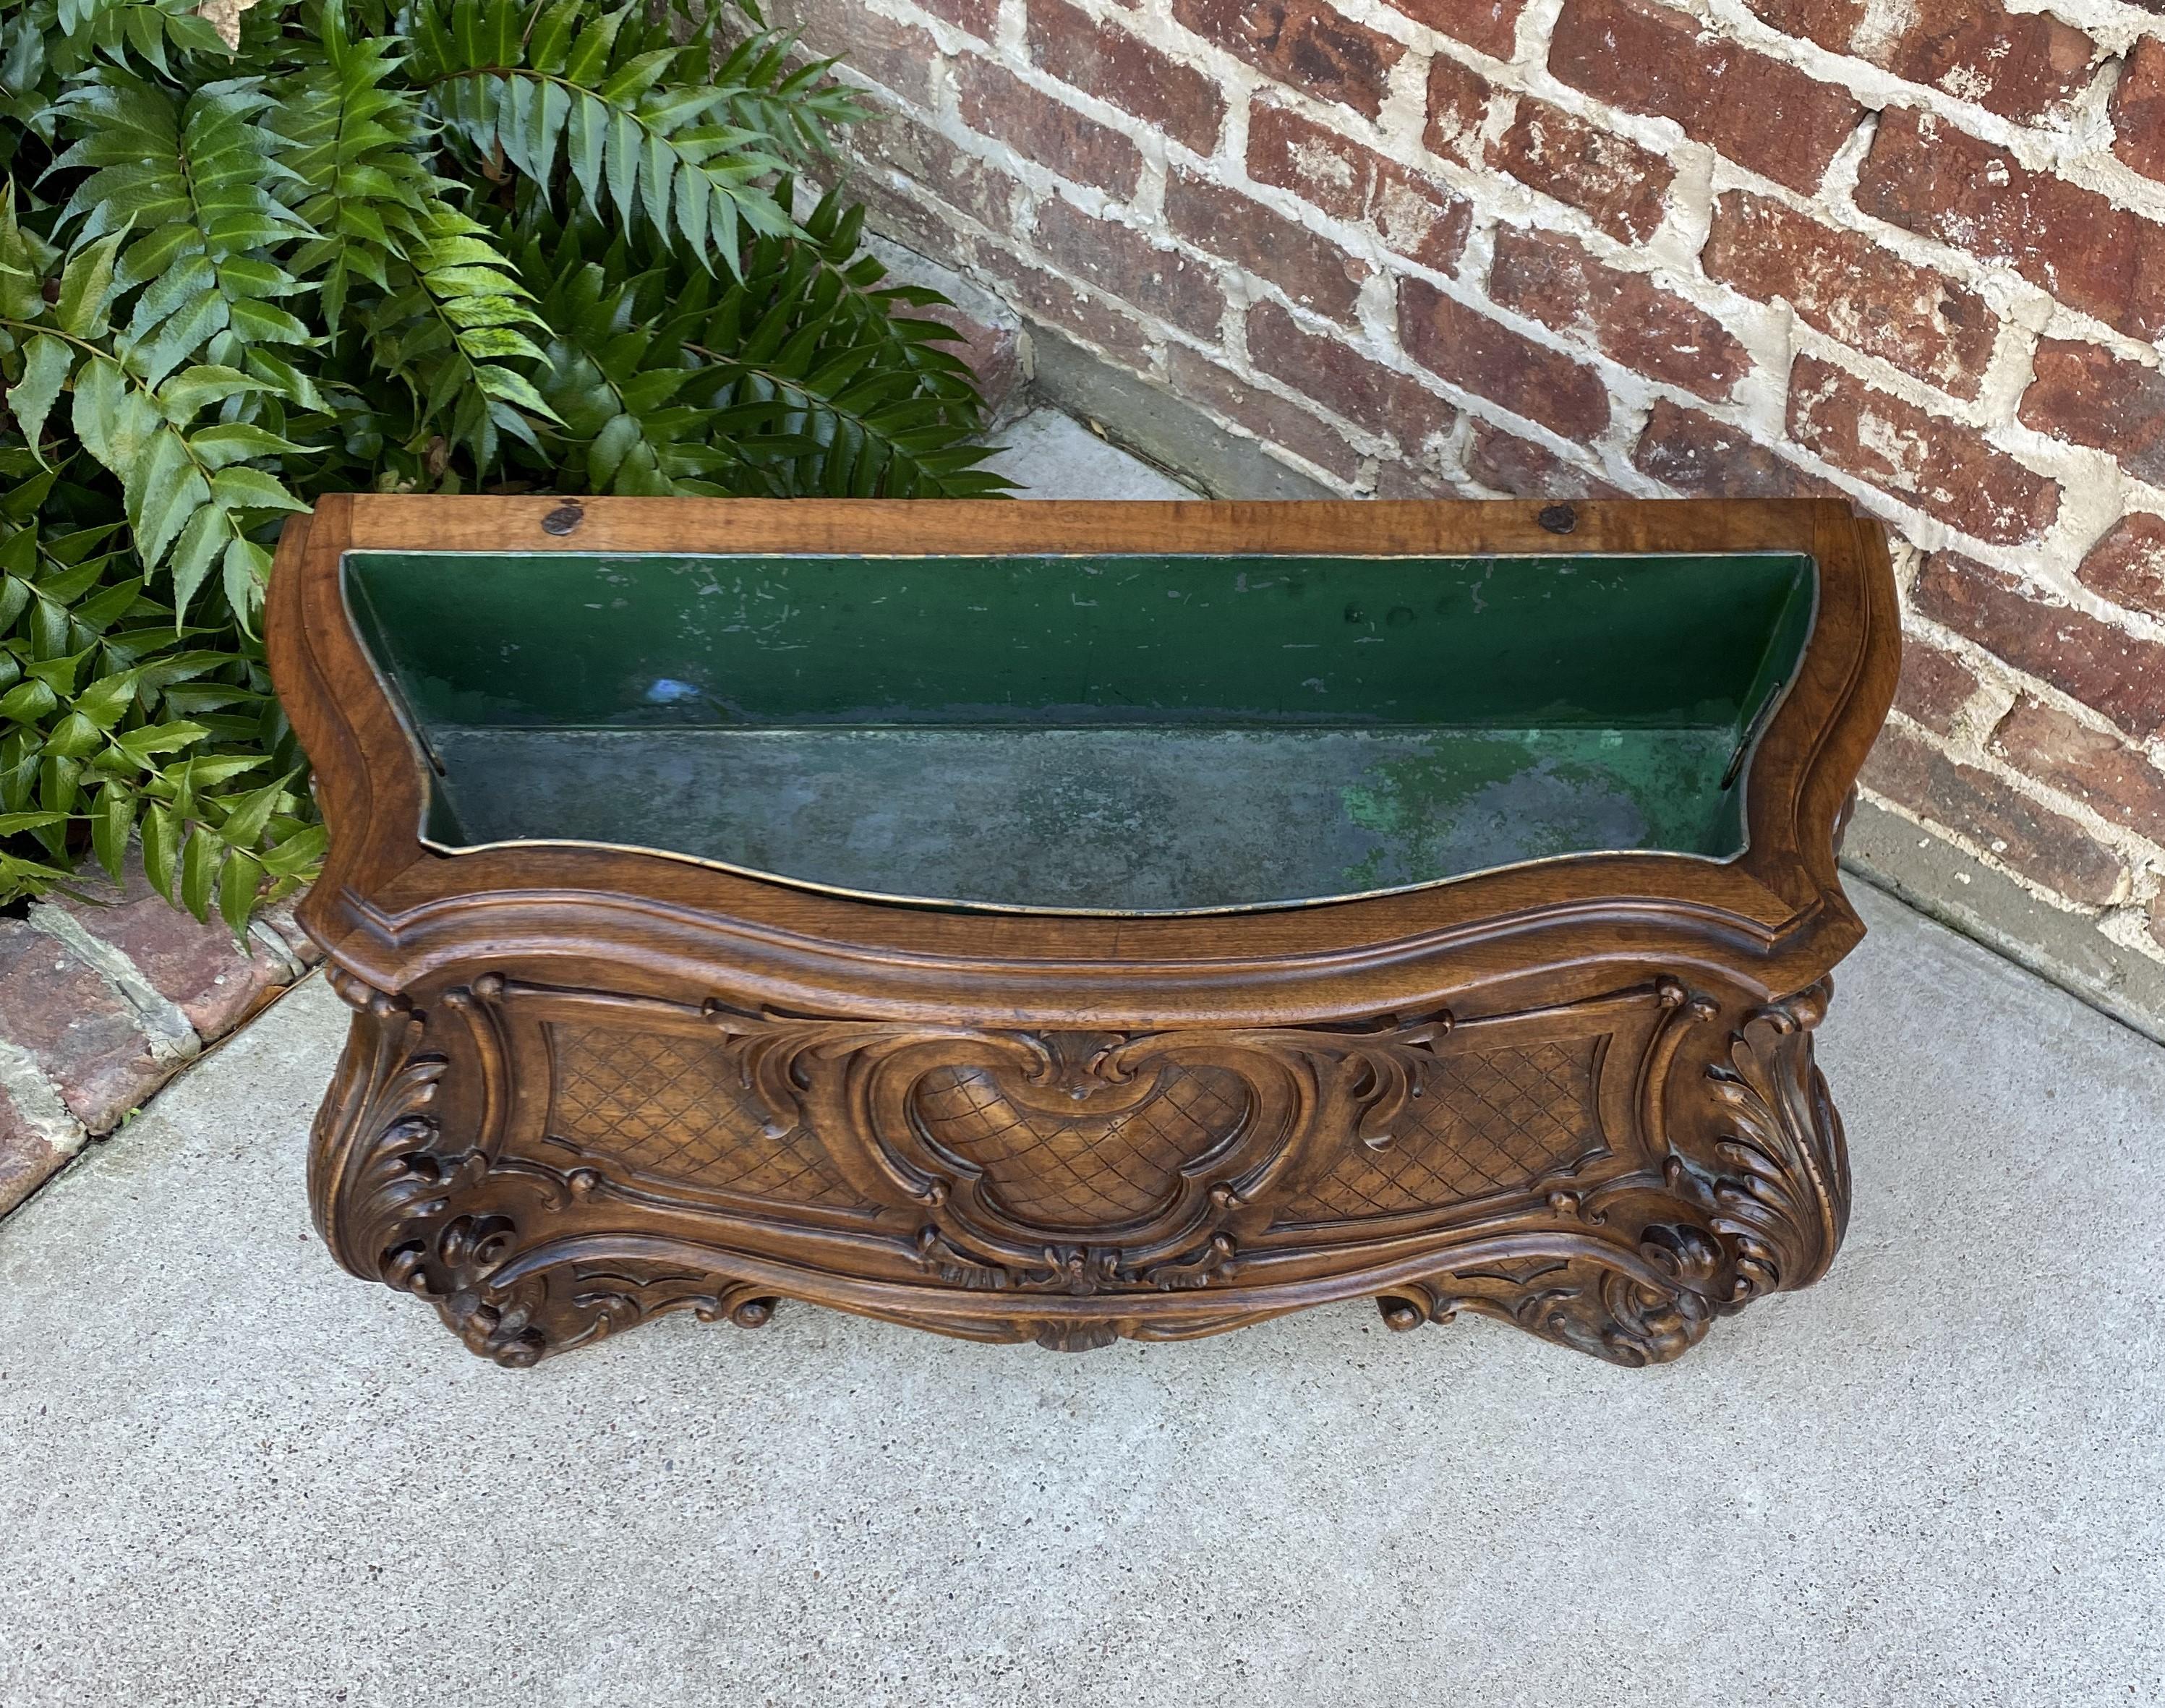 Antique French Rococo Bombe' Style Oak Planter or Flower Box with Original Tin Liner~~c. 1880s-1890s

Stunning 19th century planter with carved acanthus, lattice and French flourish accents~~original tin liner is solid~~exposed dovetailed back